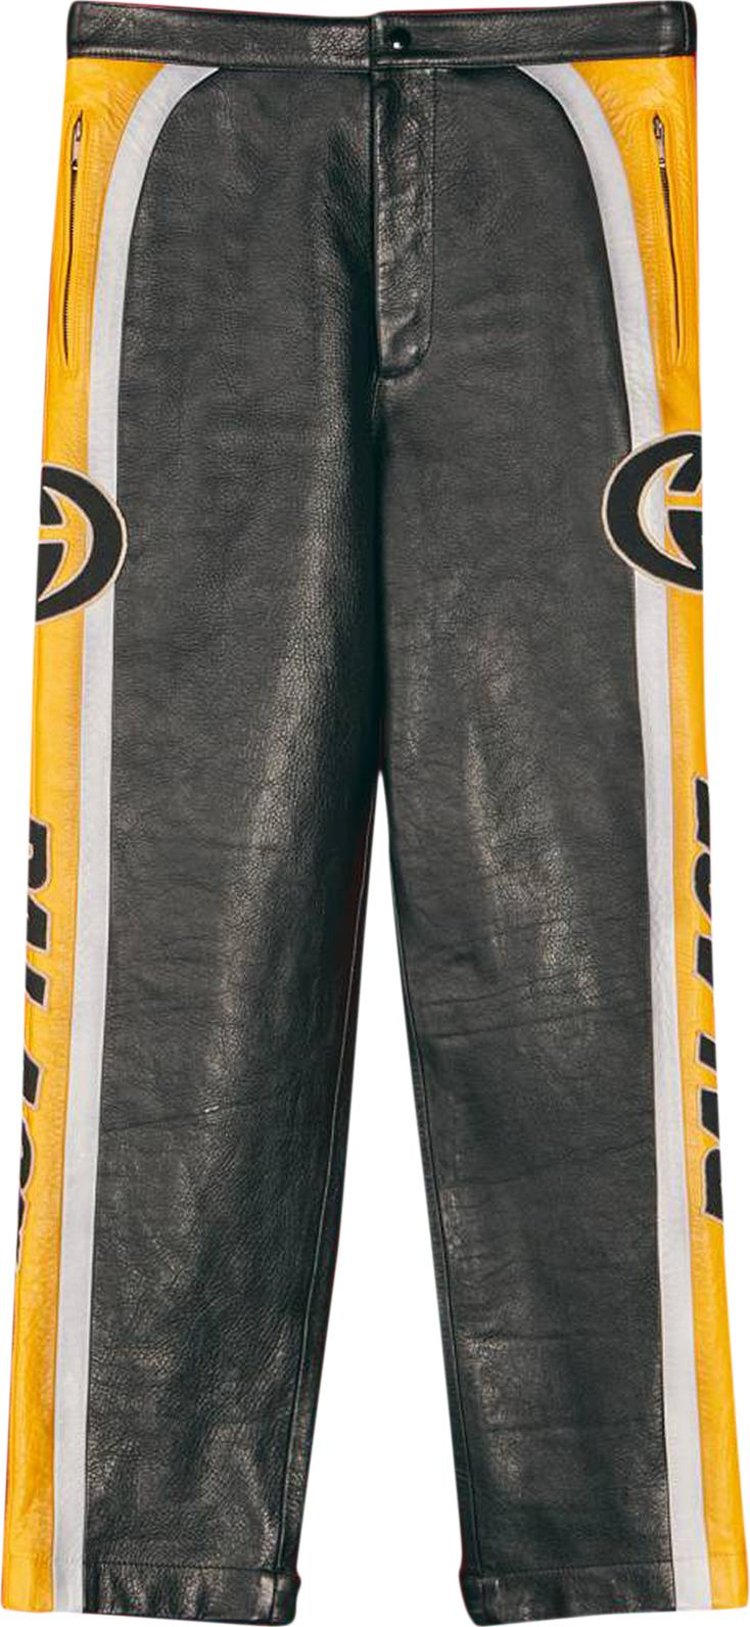 Gucci x Palace Leather Pants With Patches 'Shiny Yellow/Black/White'